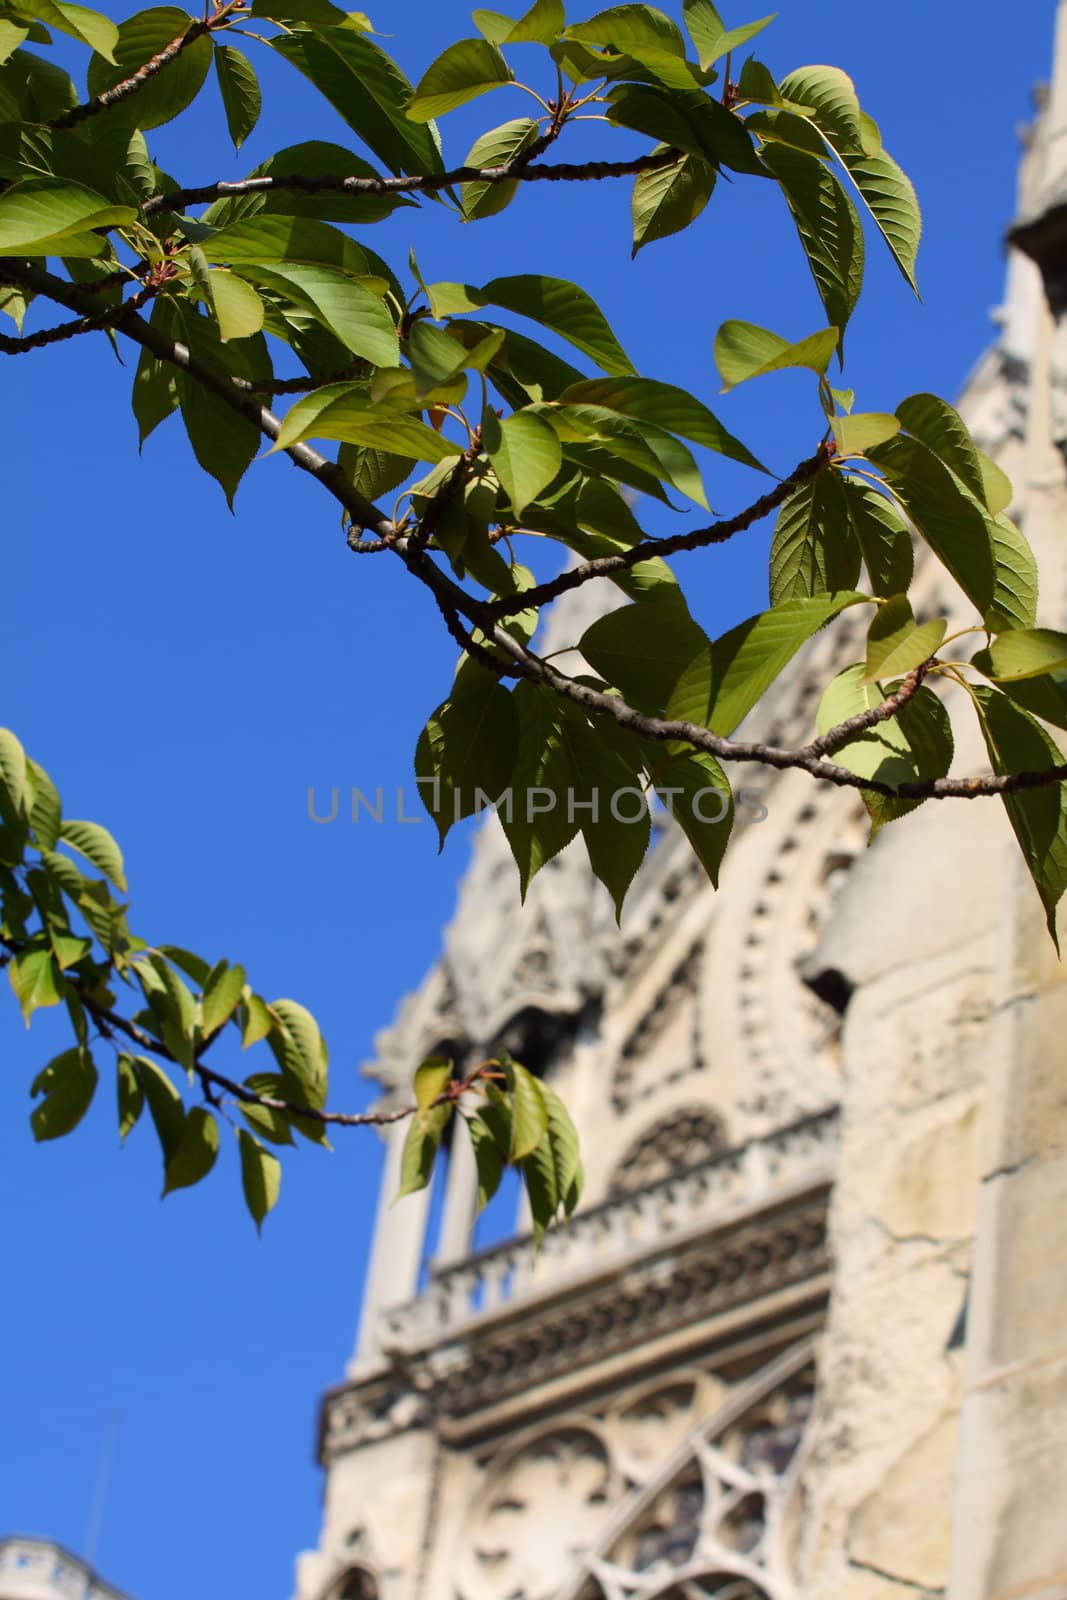 Notre Dame Cathedral - Paris by mariusz_prusaczyk